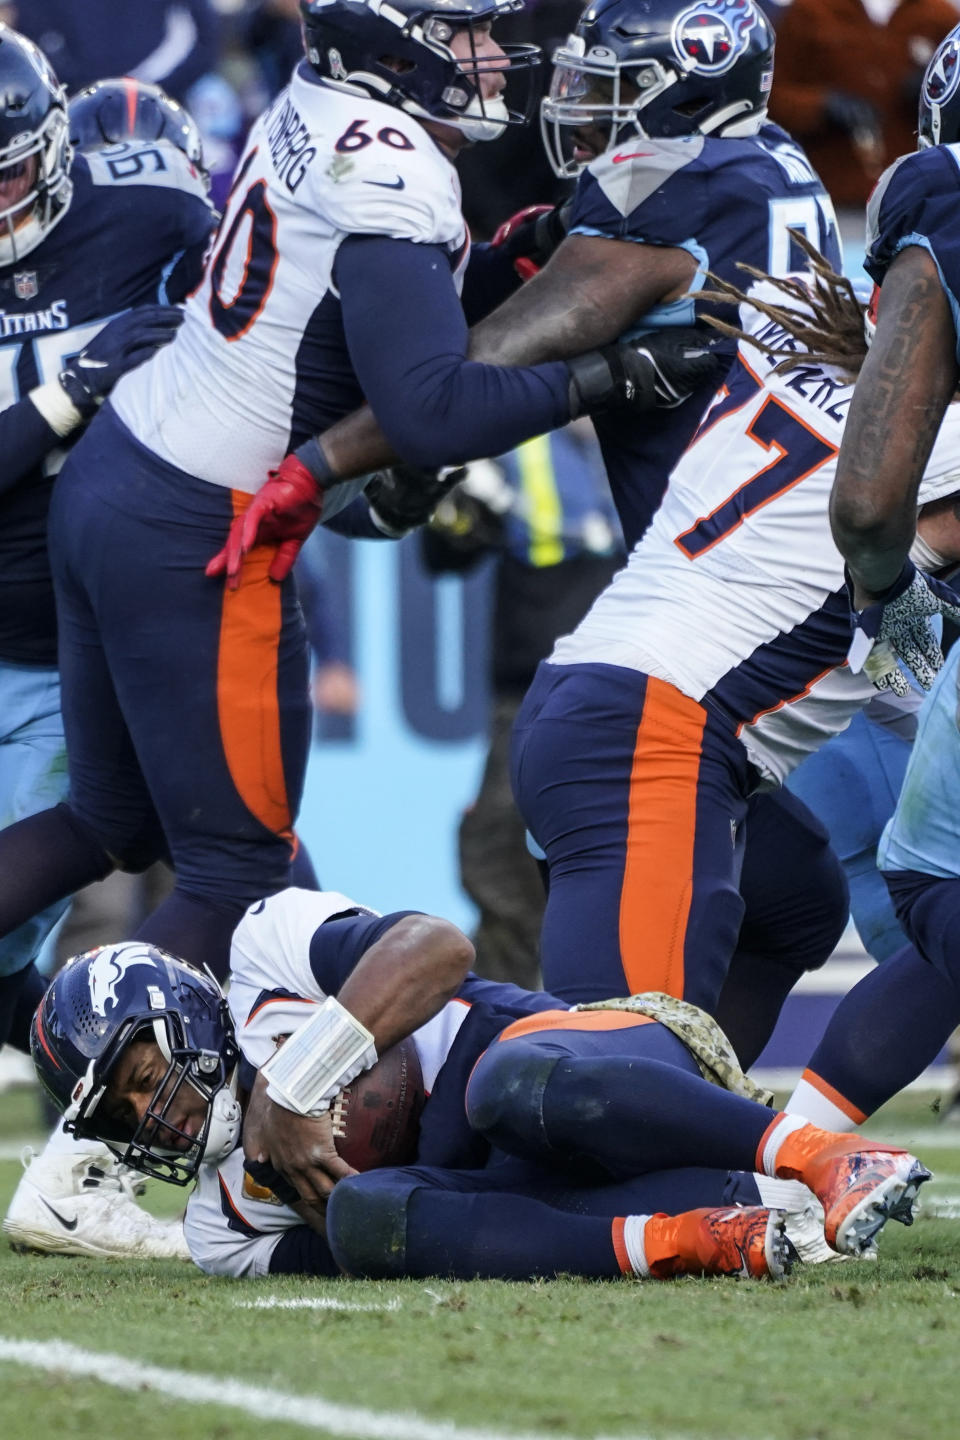 Denver Broncos quarterback Russell Wilson (3) recovers the ball after a bad snap against the Tennessee Titans during the second half of an NFL football game, Sunday, Nov. 13, 2022, in Nashville, Tenn. (AP Photo/Mark Humphrey)